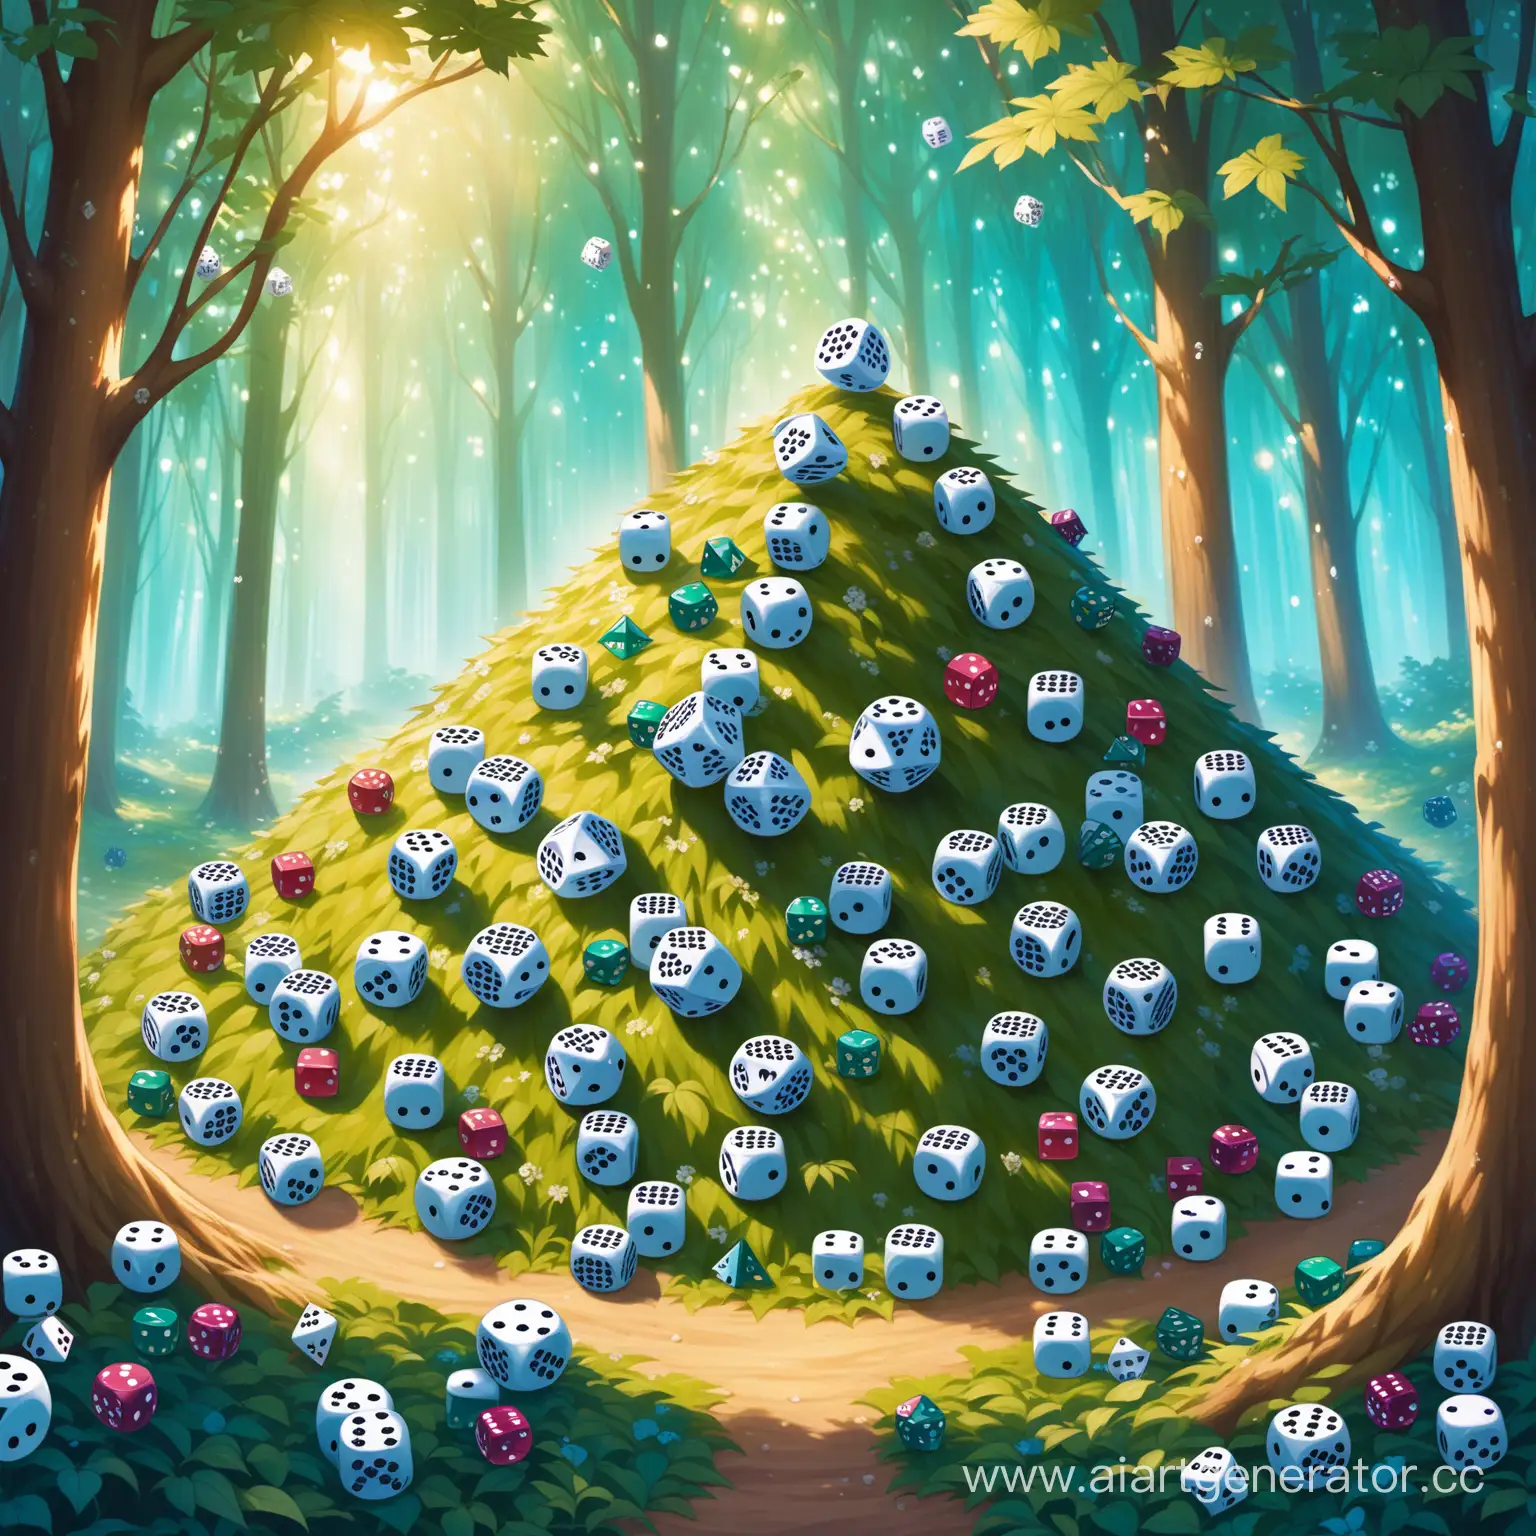 Magical-Creatures-Surrounding-a-Pile-of-Dice-in-the-Forest